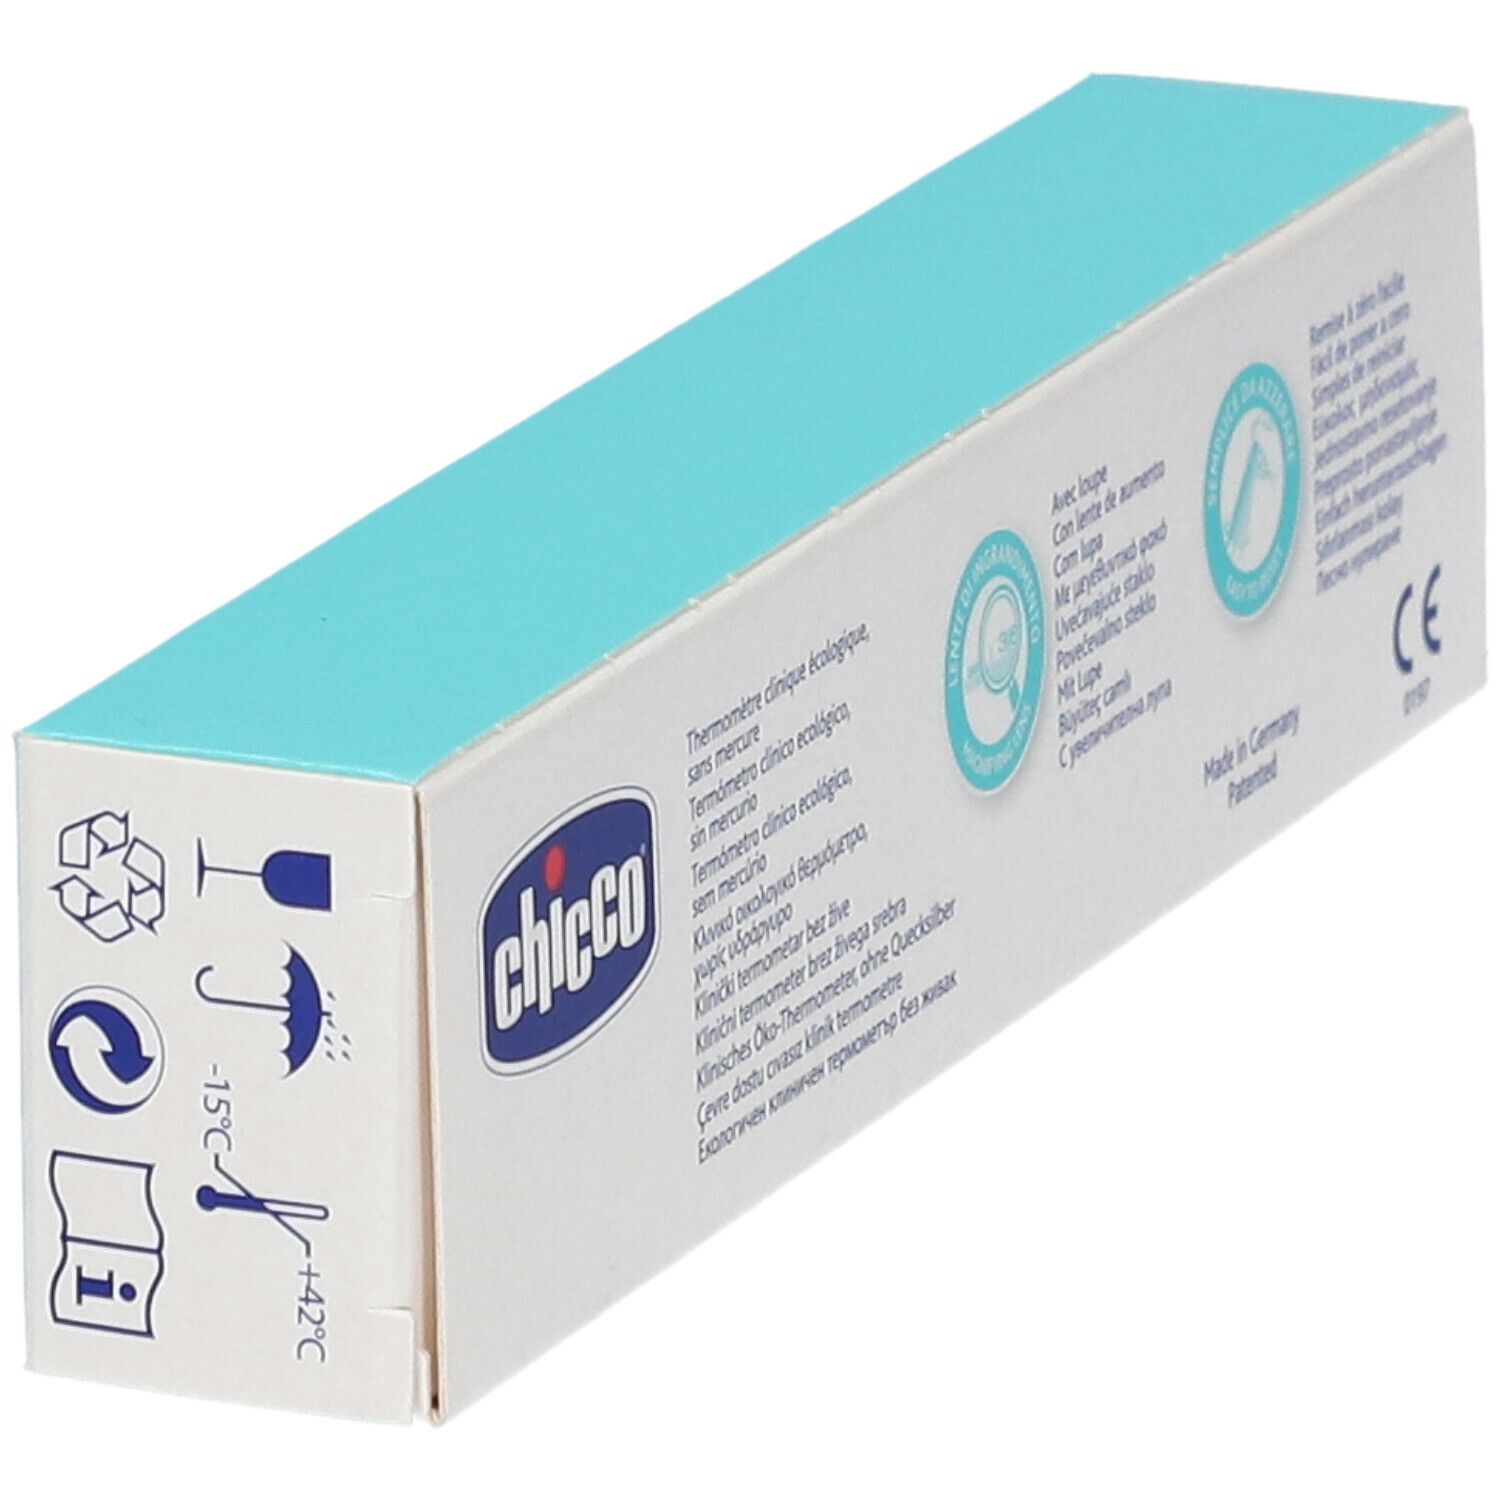 Chicco Thermo Eco 0 m+